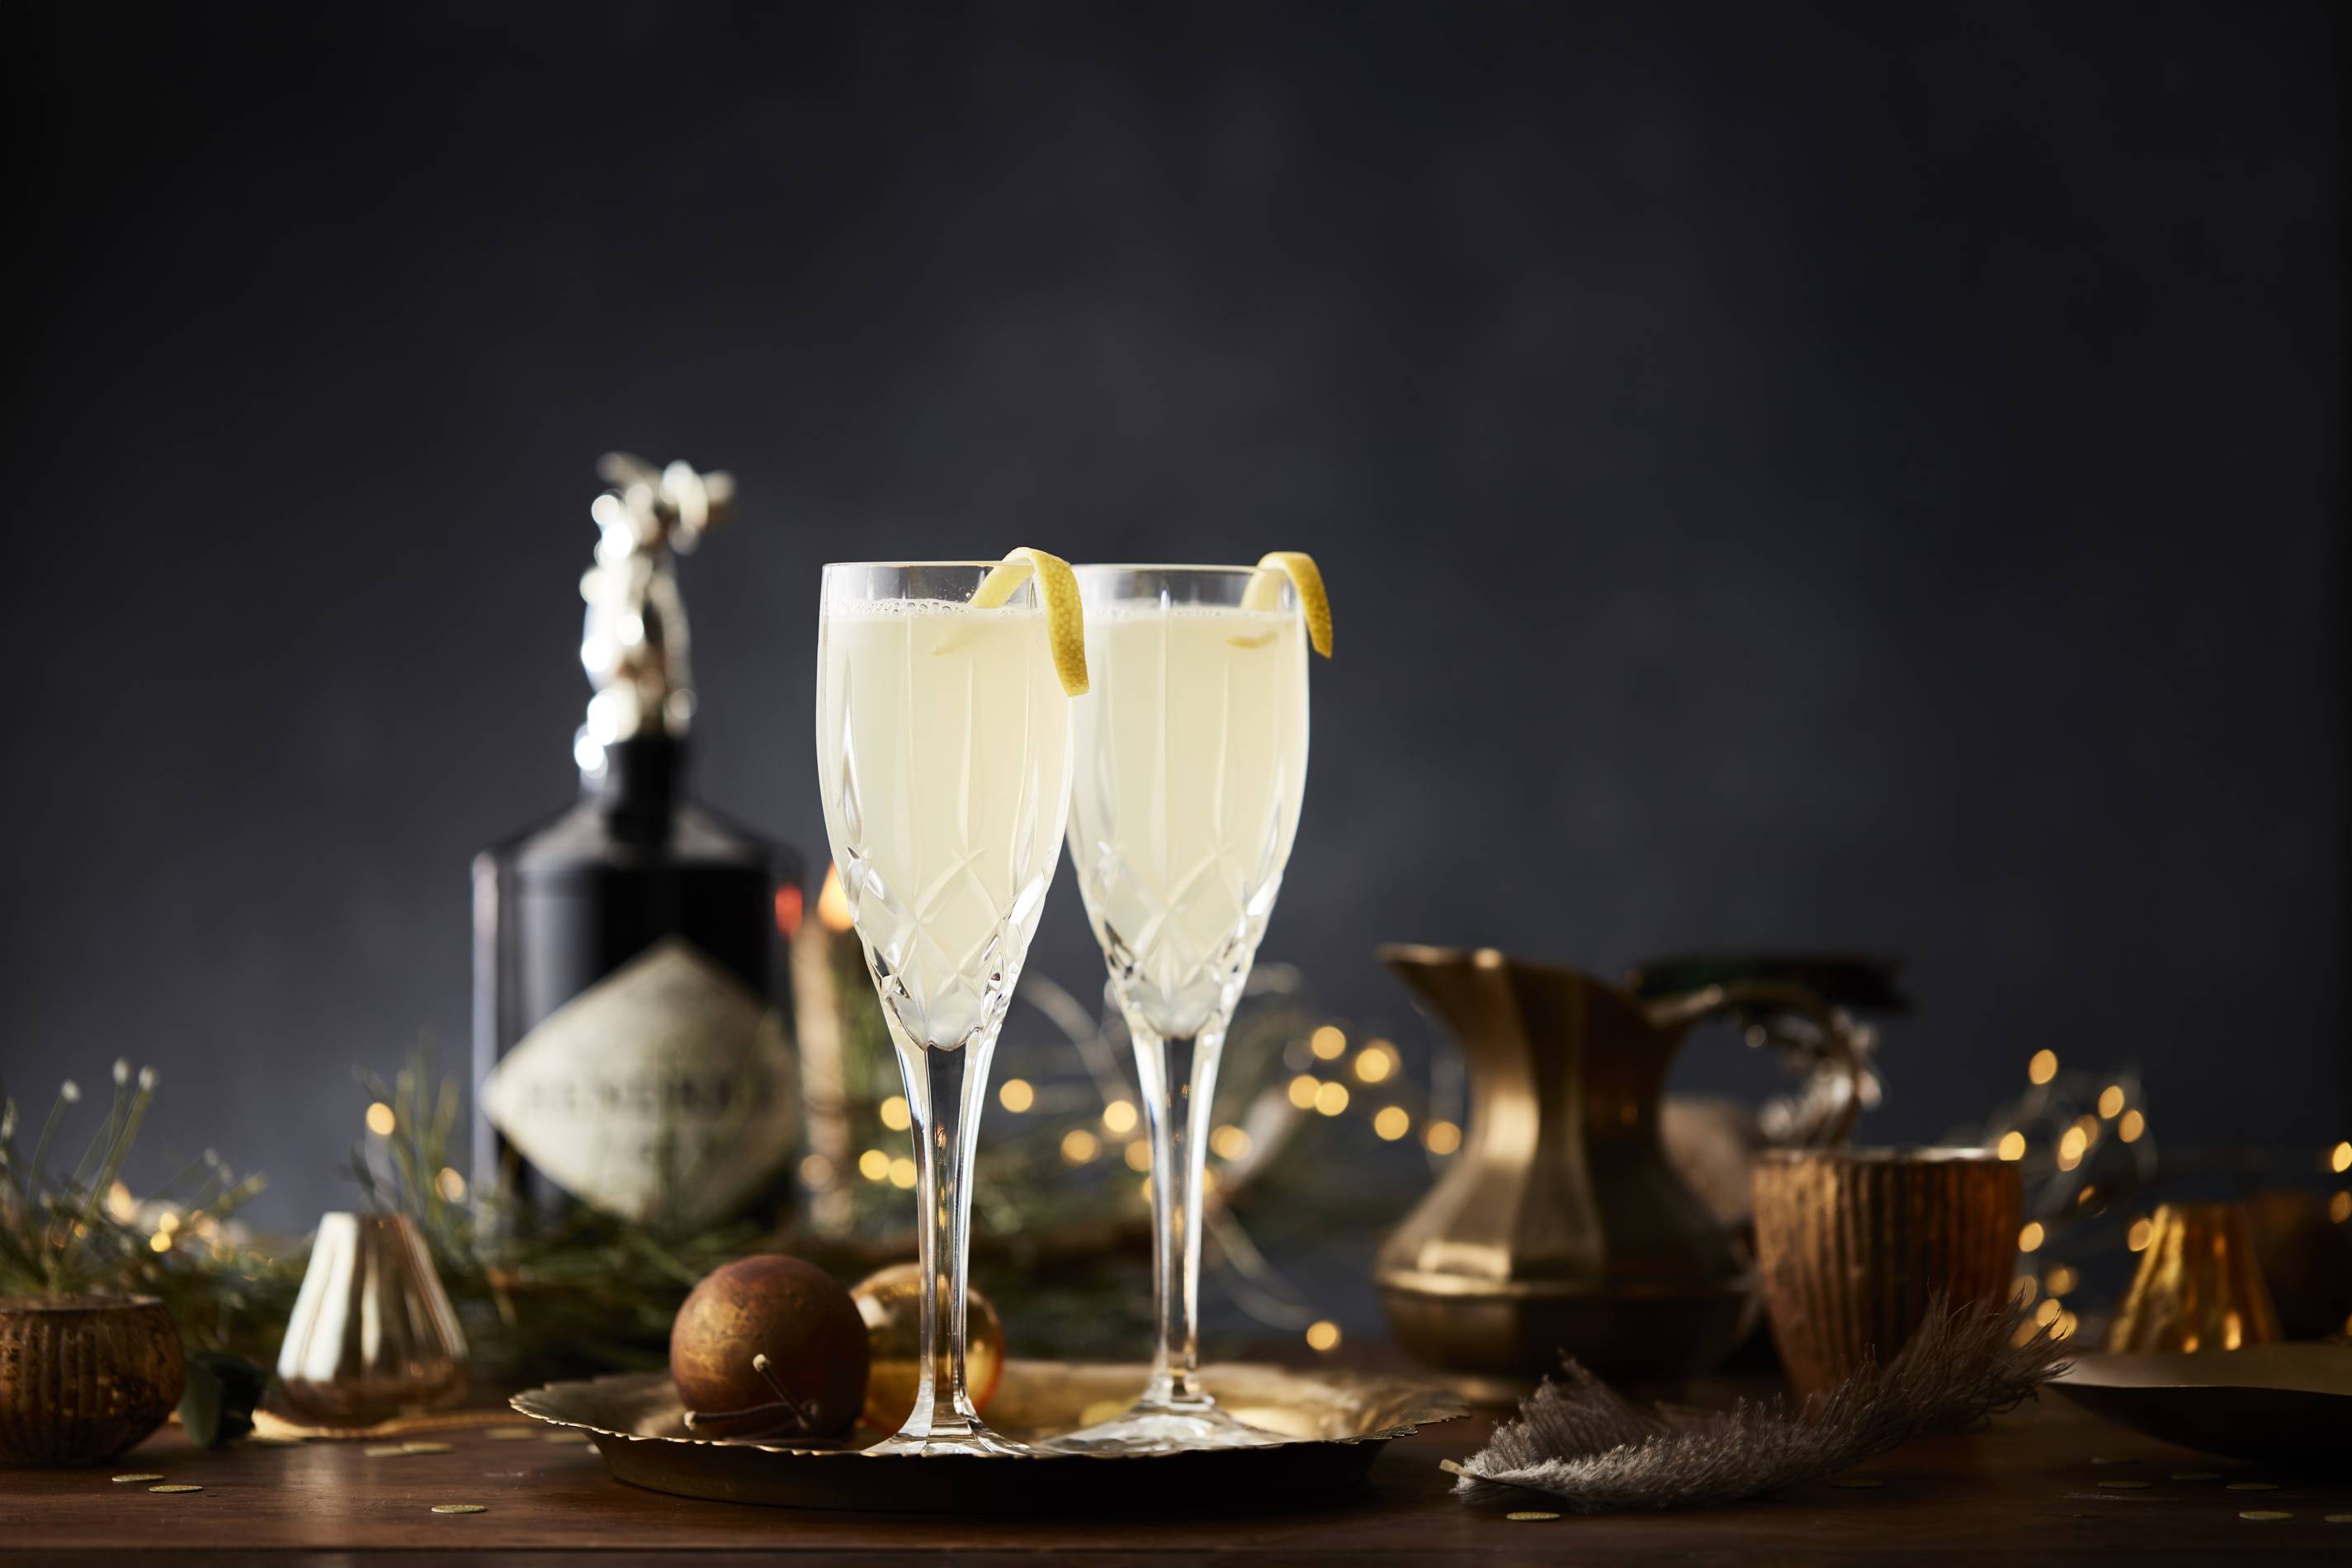 French 75 cocktail by Hendrick's Gin